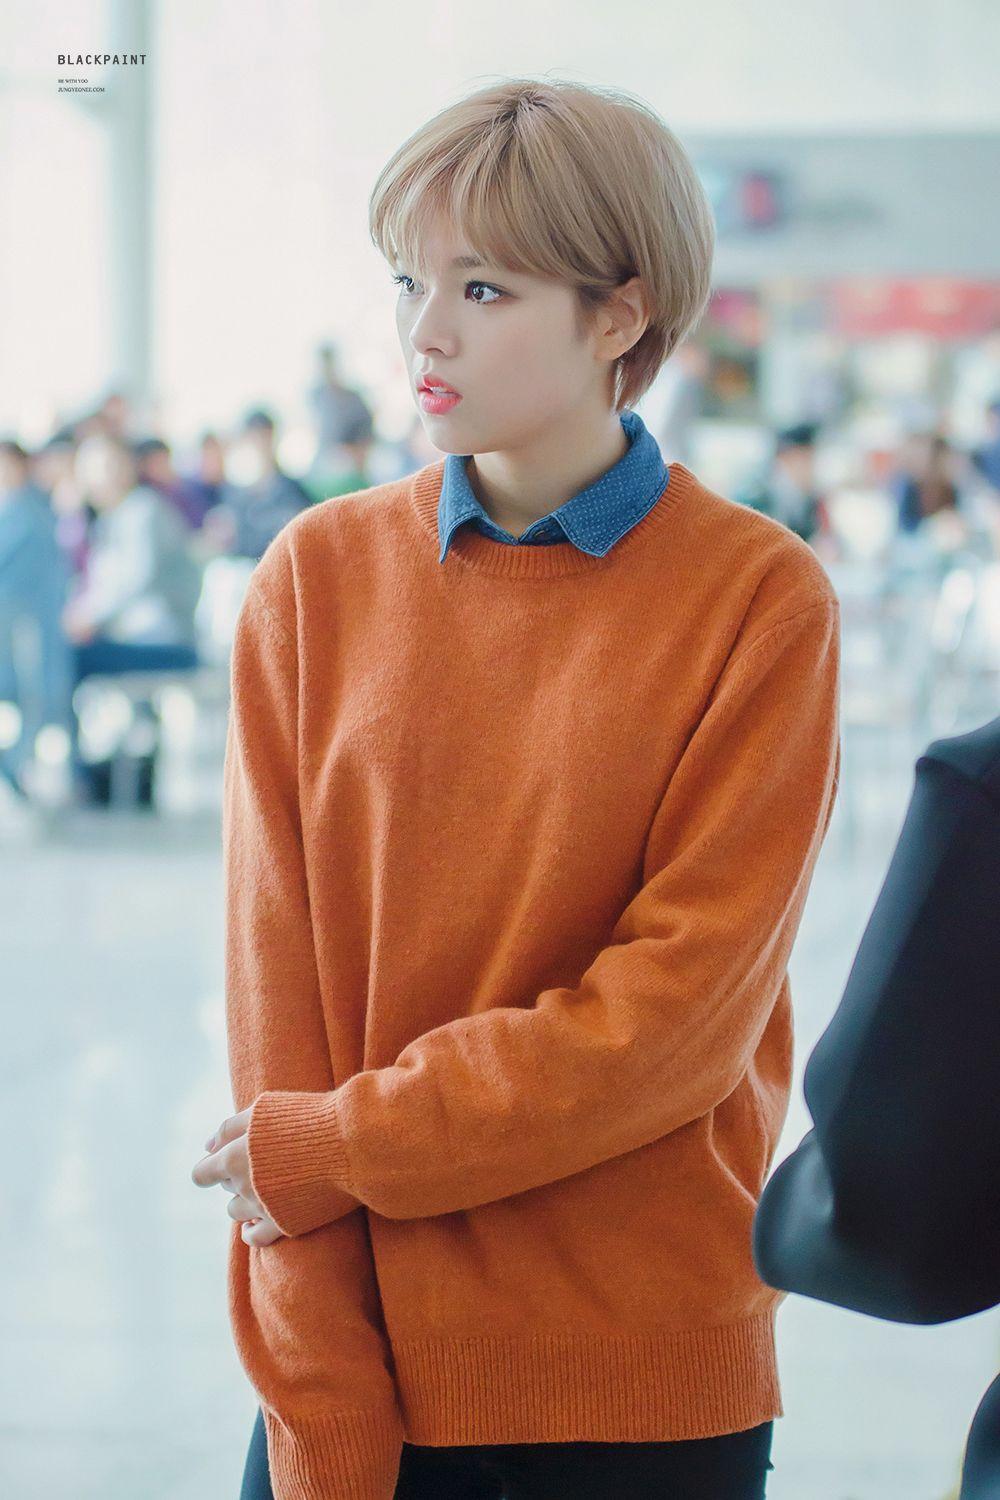 Honest Question about Twice Jeongyeon